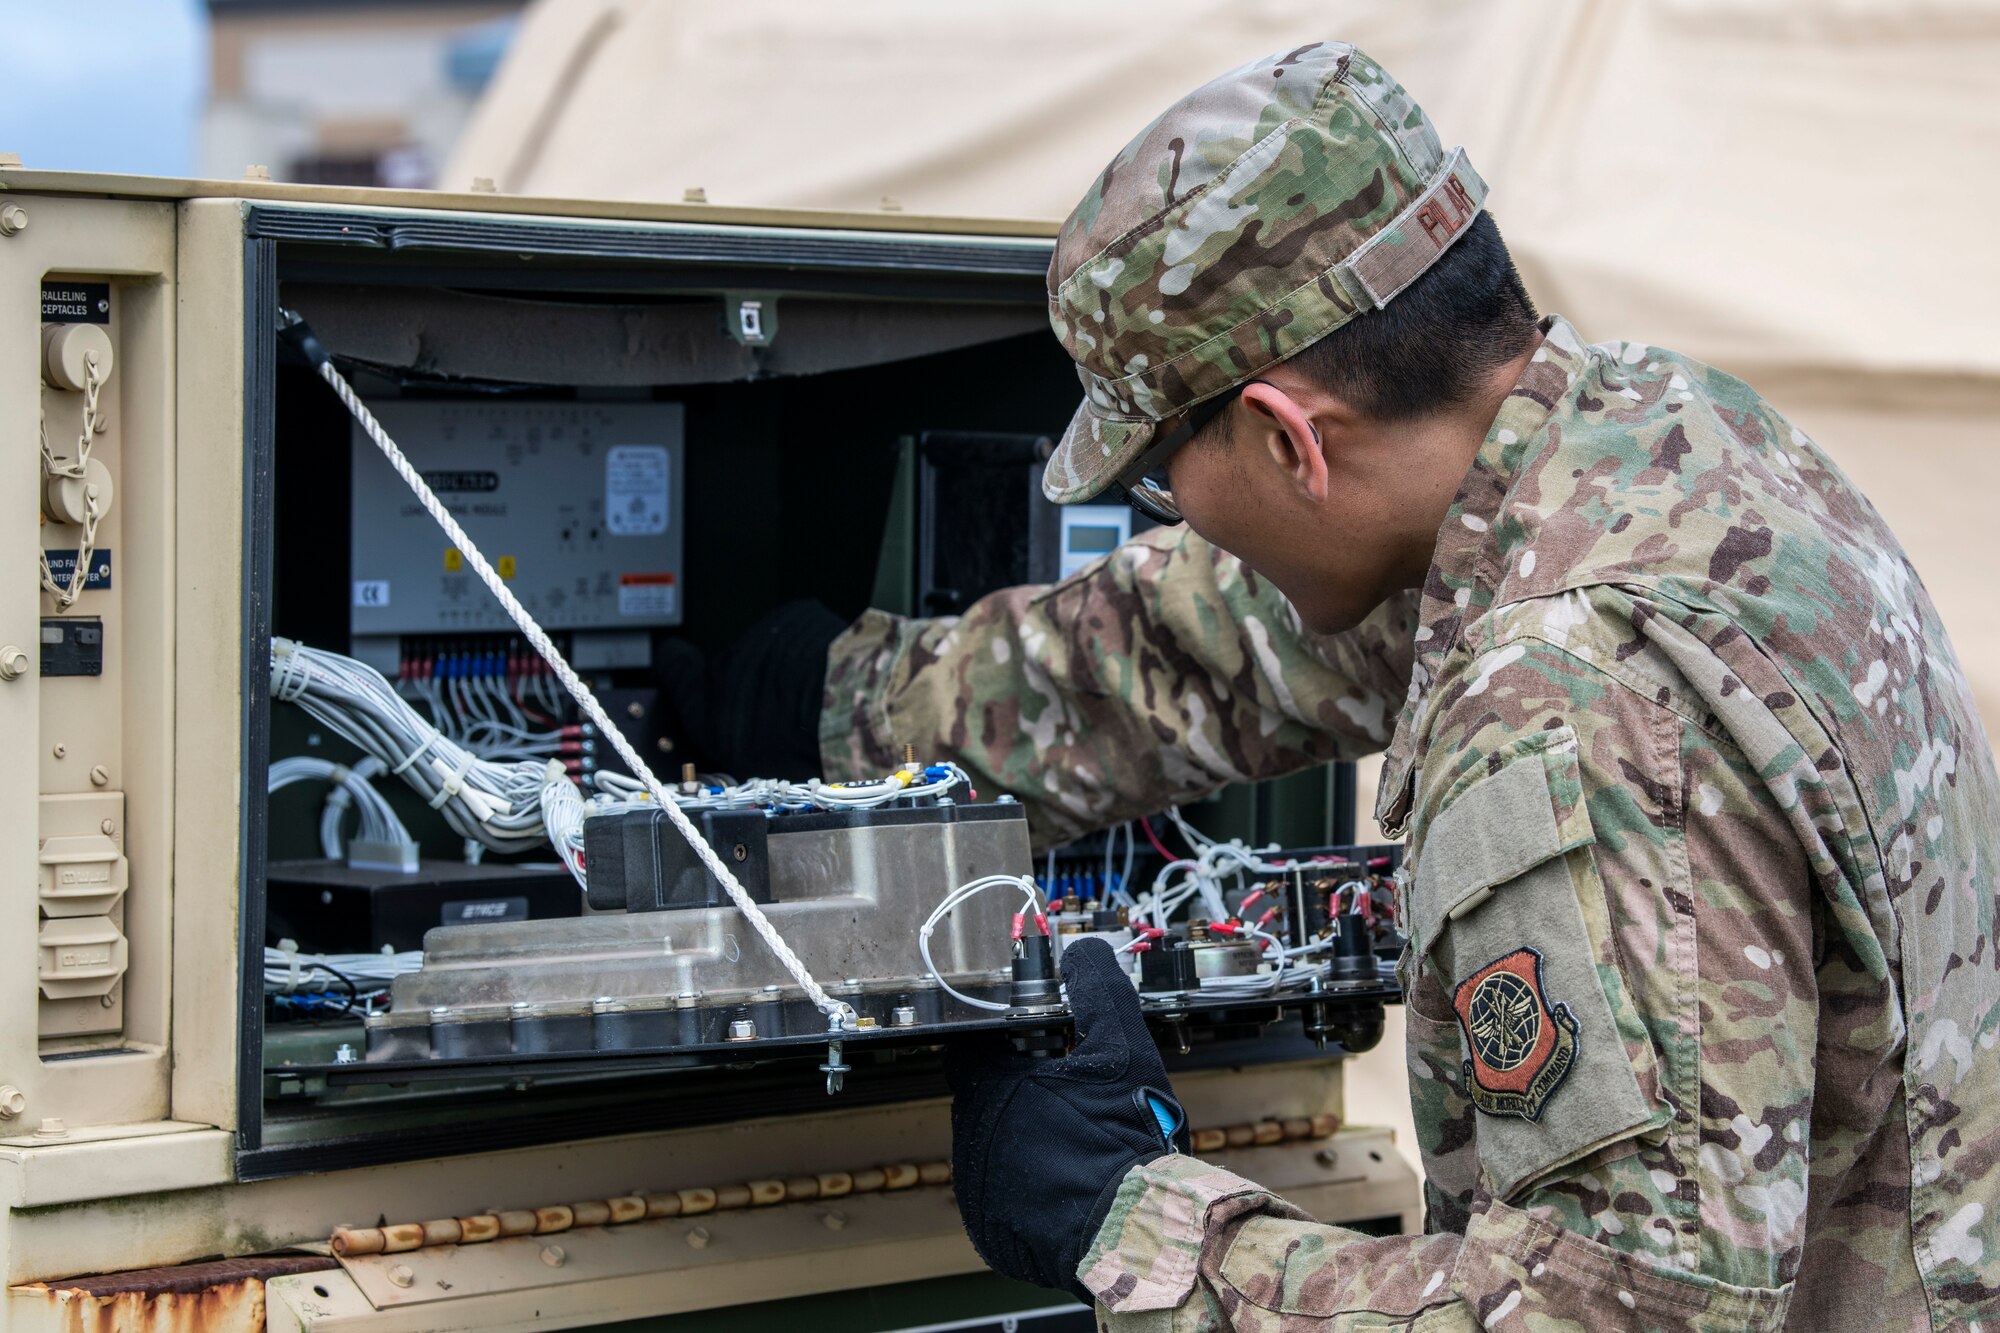 Tech. Sgt. Erickson Pilar, 436th Medical Support Squadron noncommissioned officer in charge of medical maintenance, works on a diesel generator at Dover Air Force Base, Delaware, March 30, 2020. The generator was attached to a tent that was built to prepare for patient overflow due to COVID-19. Dover AFB medical personnel continue to provide care to Airmen and their families, while supporting state and national response efforts. (U.S. Air Force photo by Senior Airman Christopher Quail)